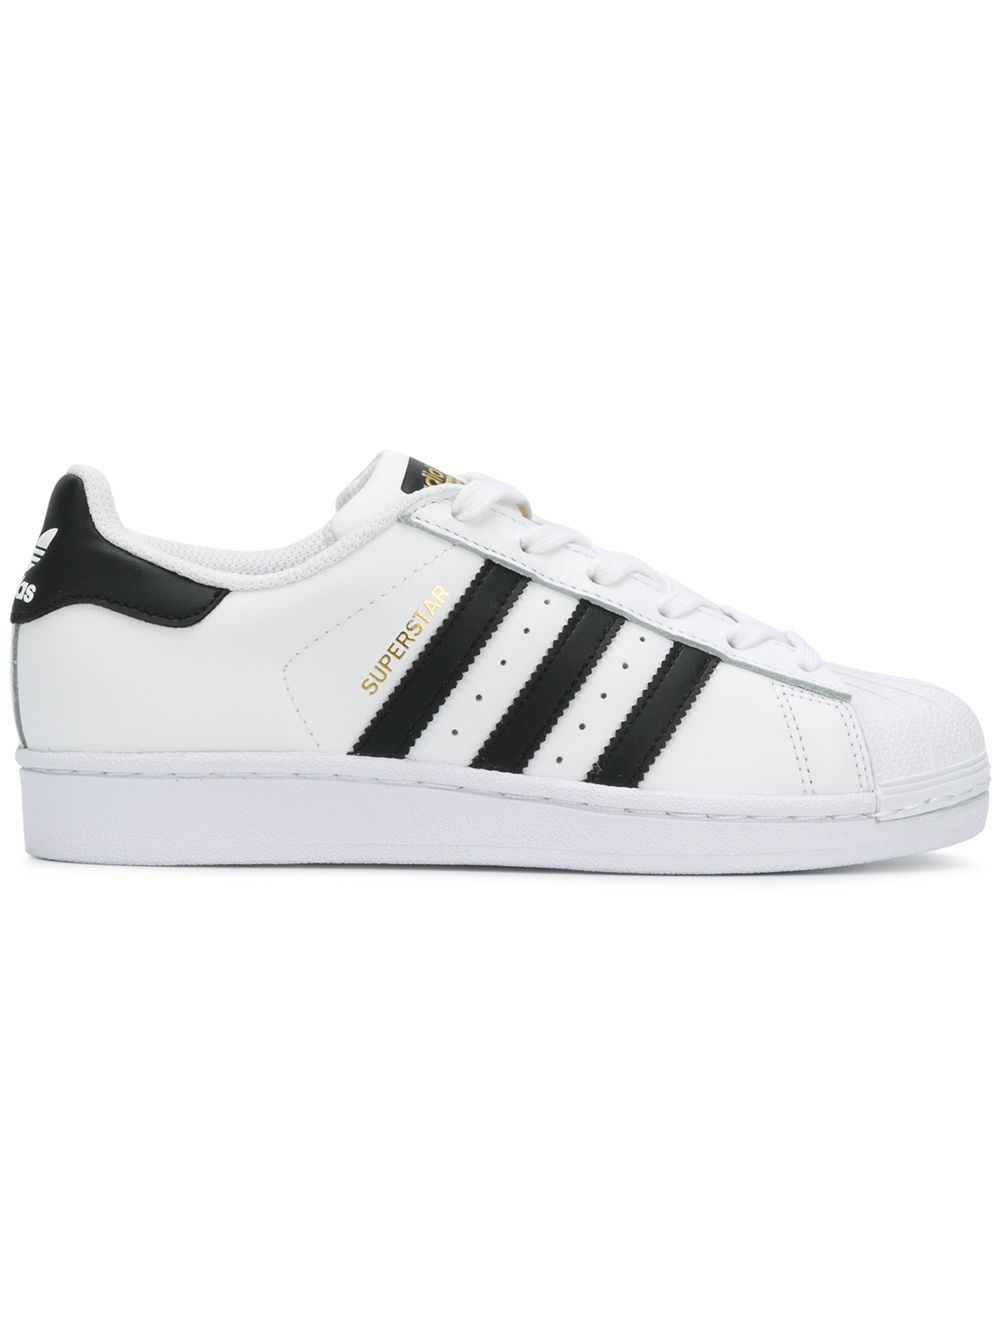 Adidas Superstar sneakers - White | FarFetch US